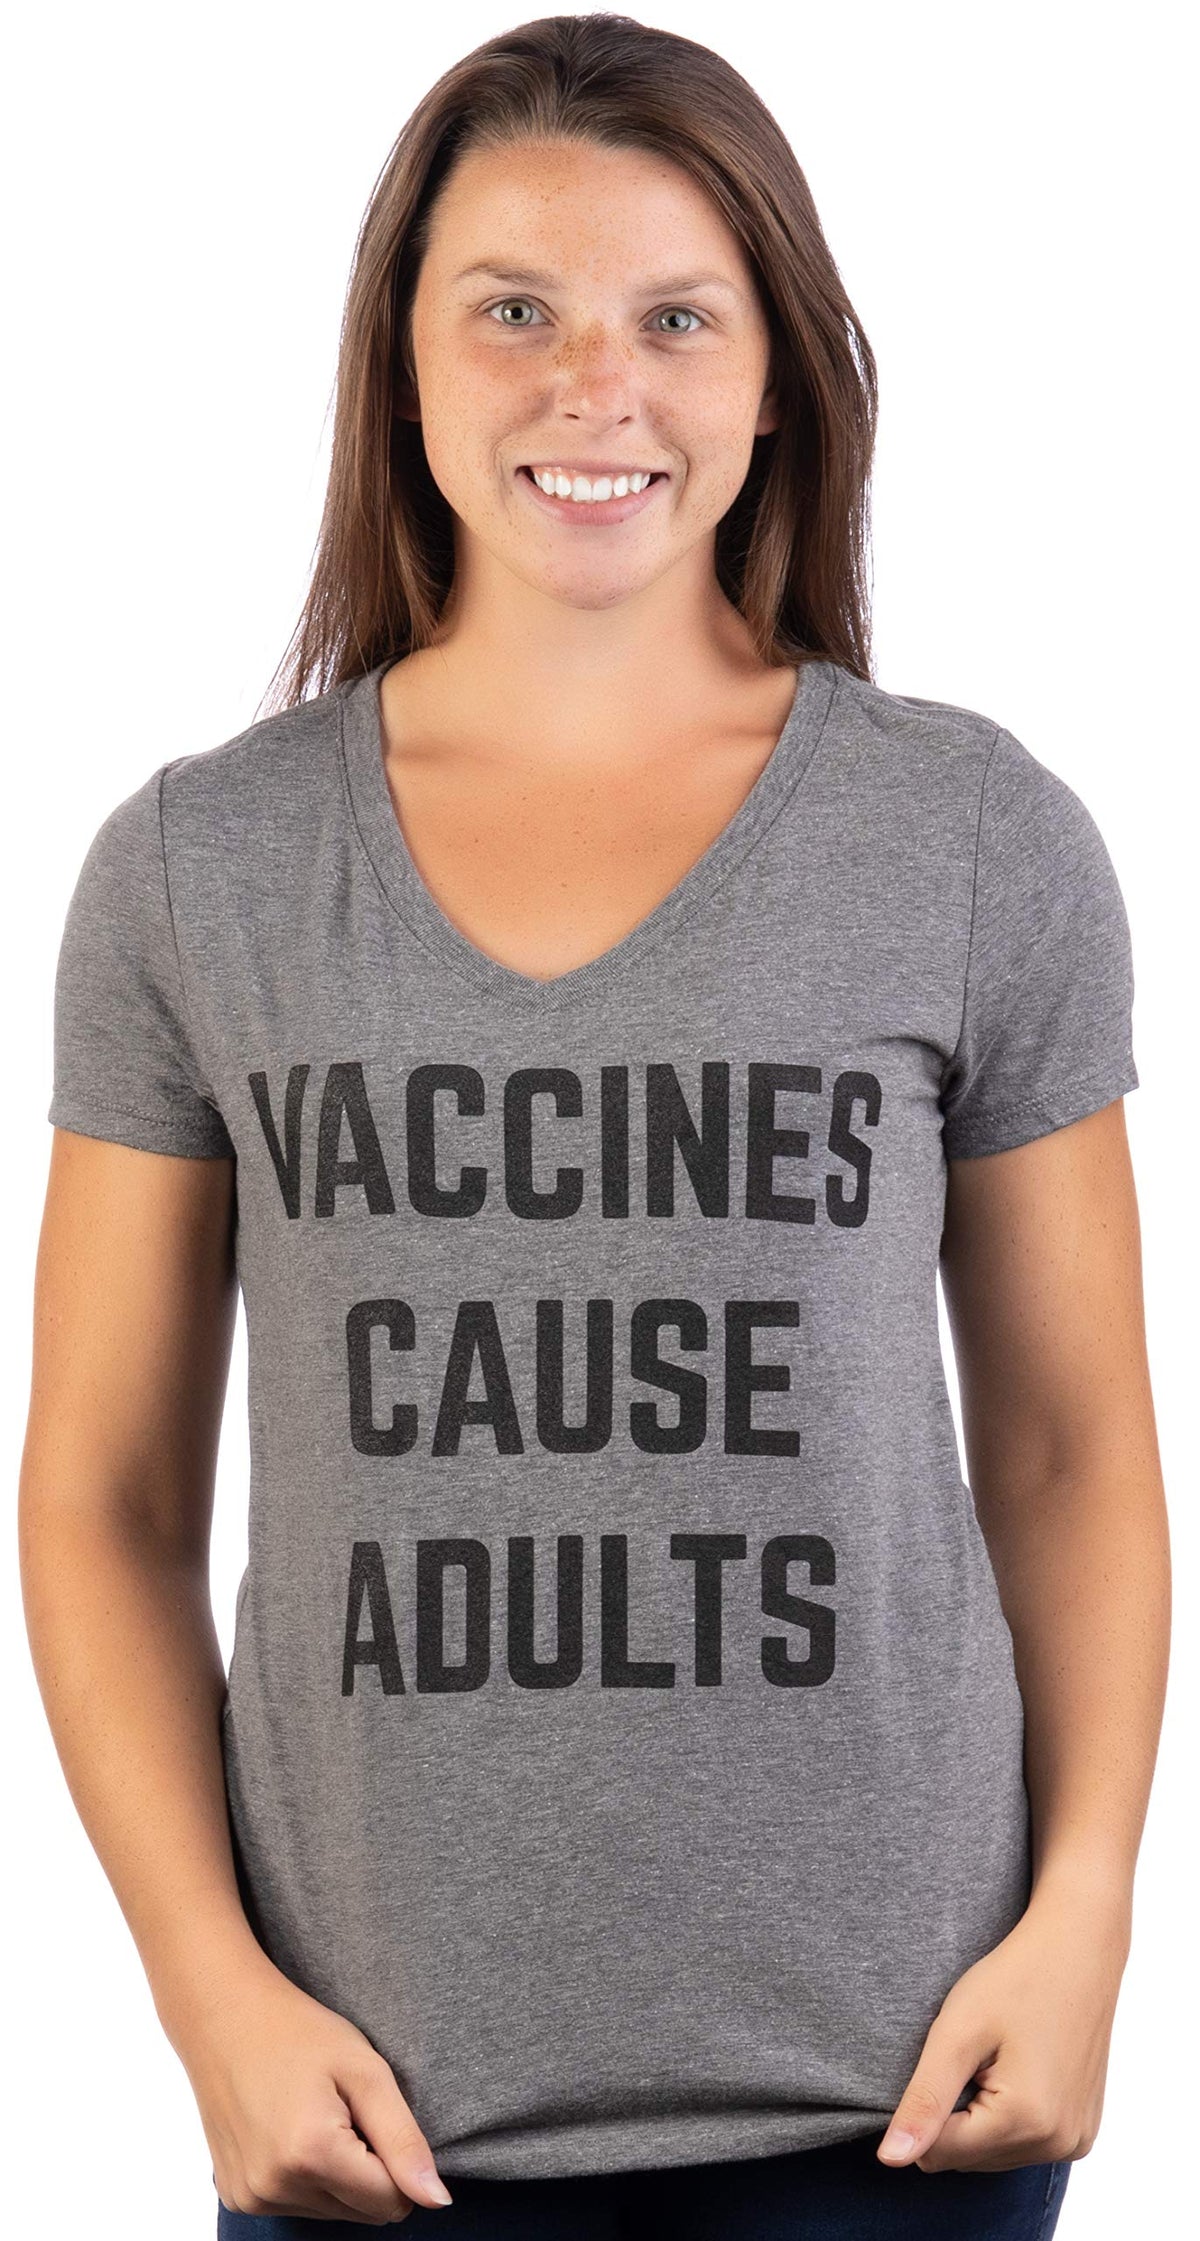 Vaccines Cause Adults | Funny Doctor Nurse Science Humor V-Neck T-Shirt for Women